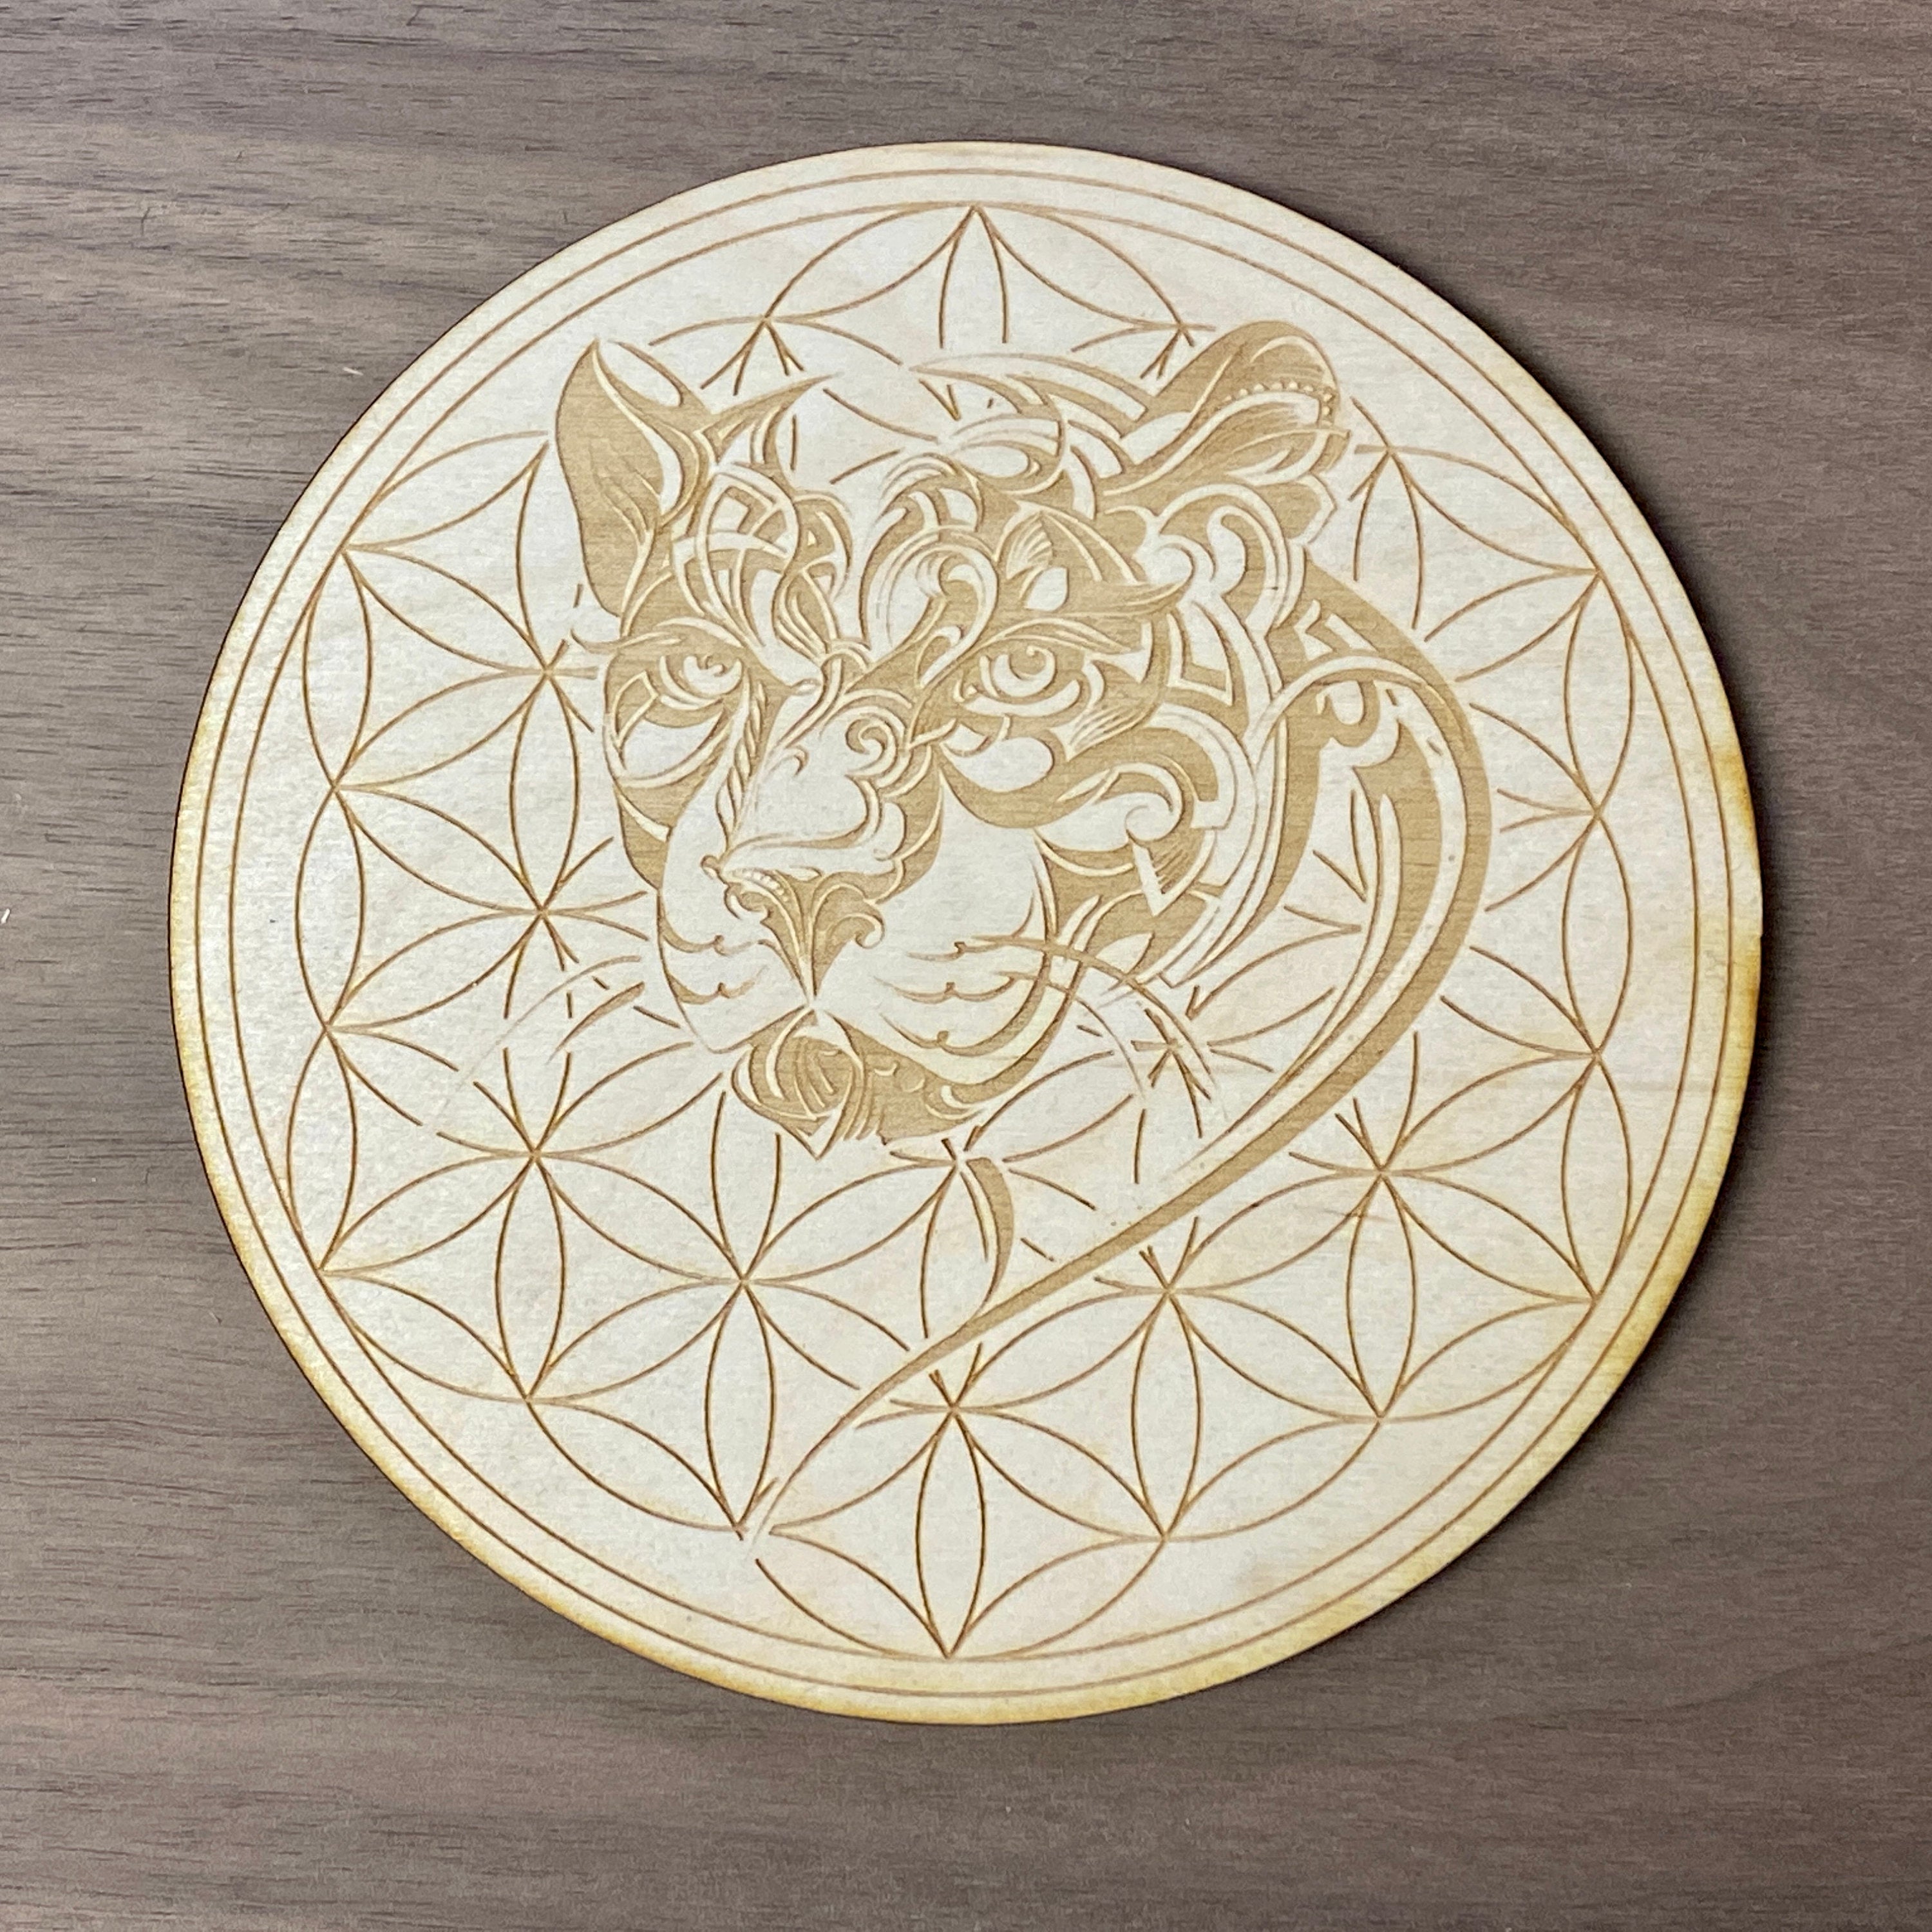 Panther Flower of Life Crystal Grid